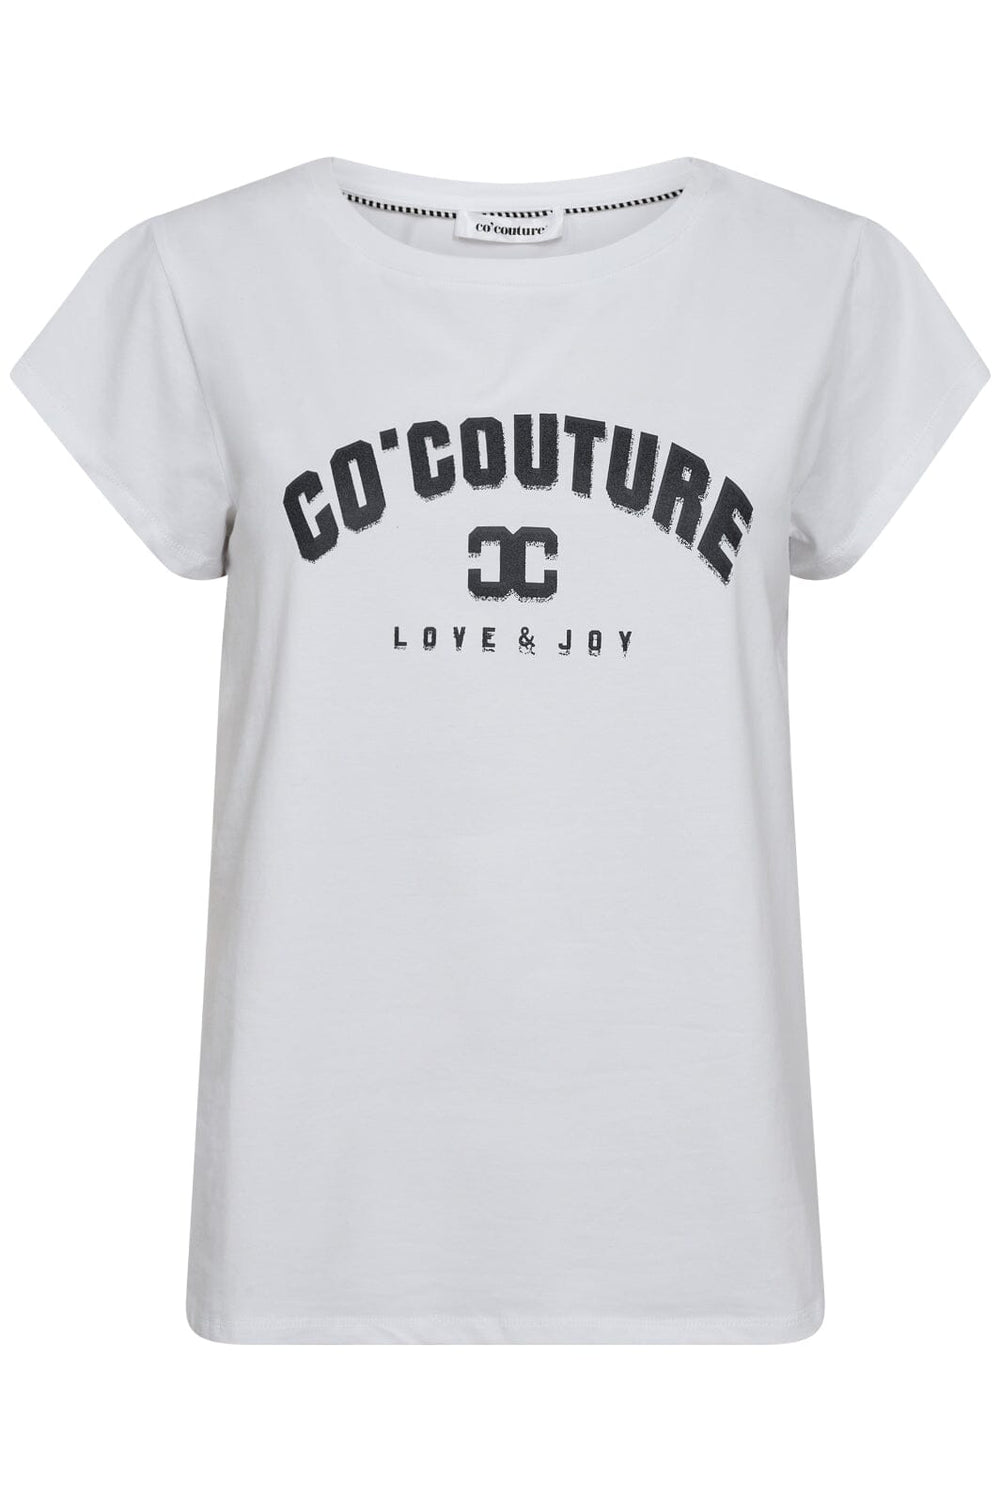 Co´couture - Dustcc Print Tee 33085 - 40061 Whiteink T-shirts 